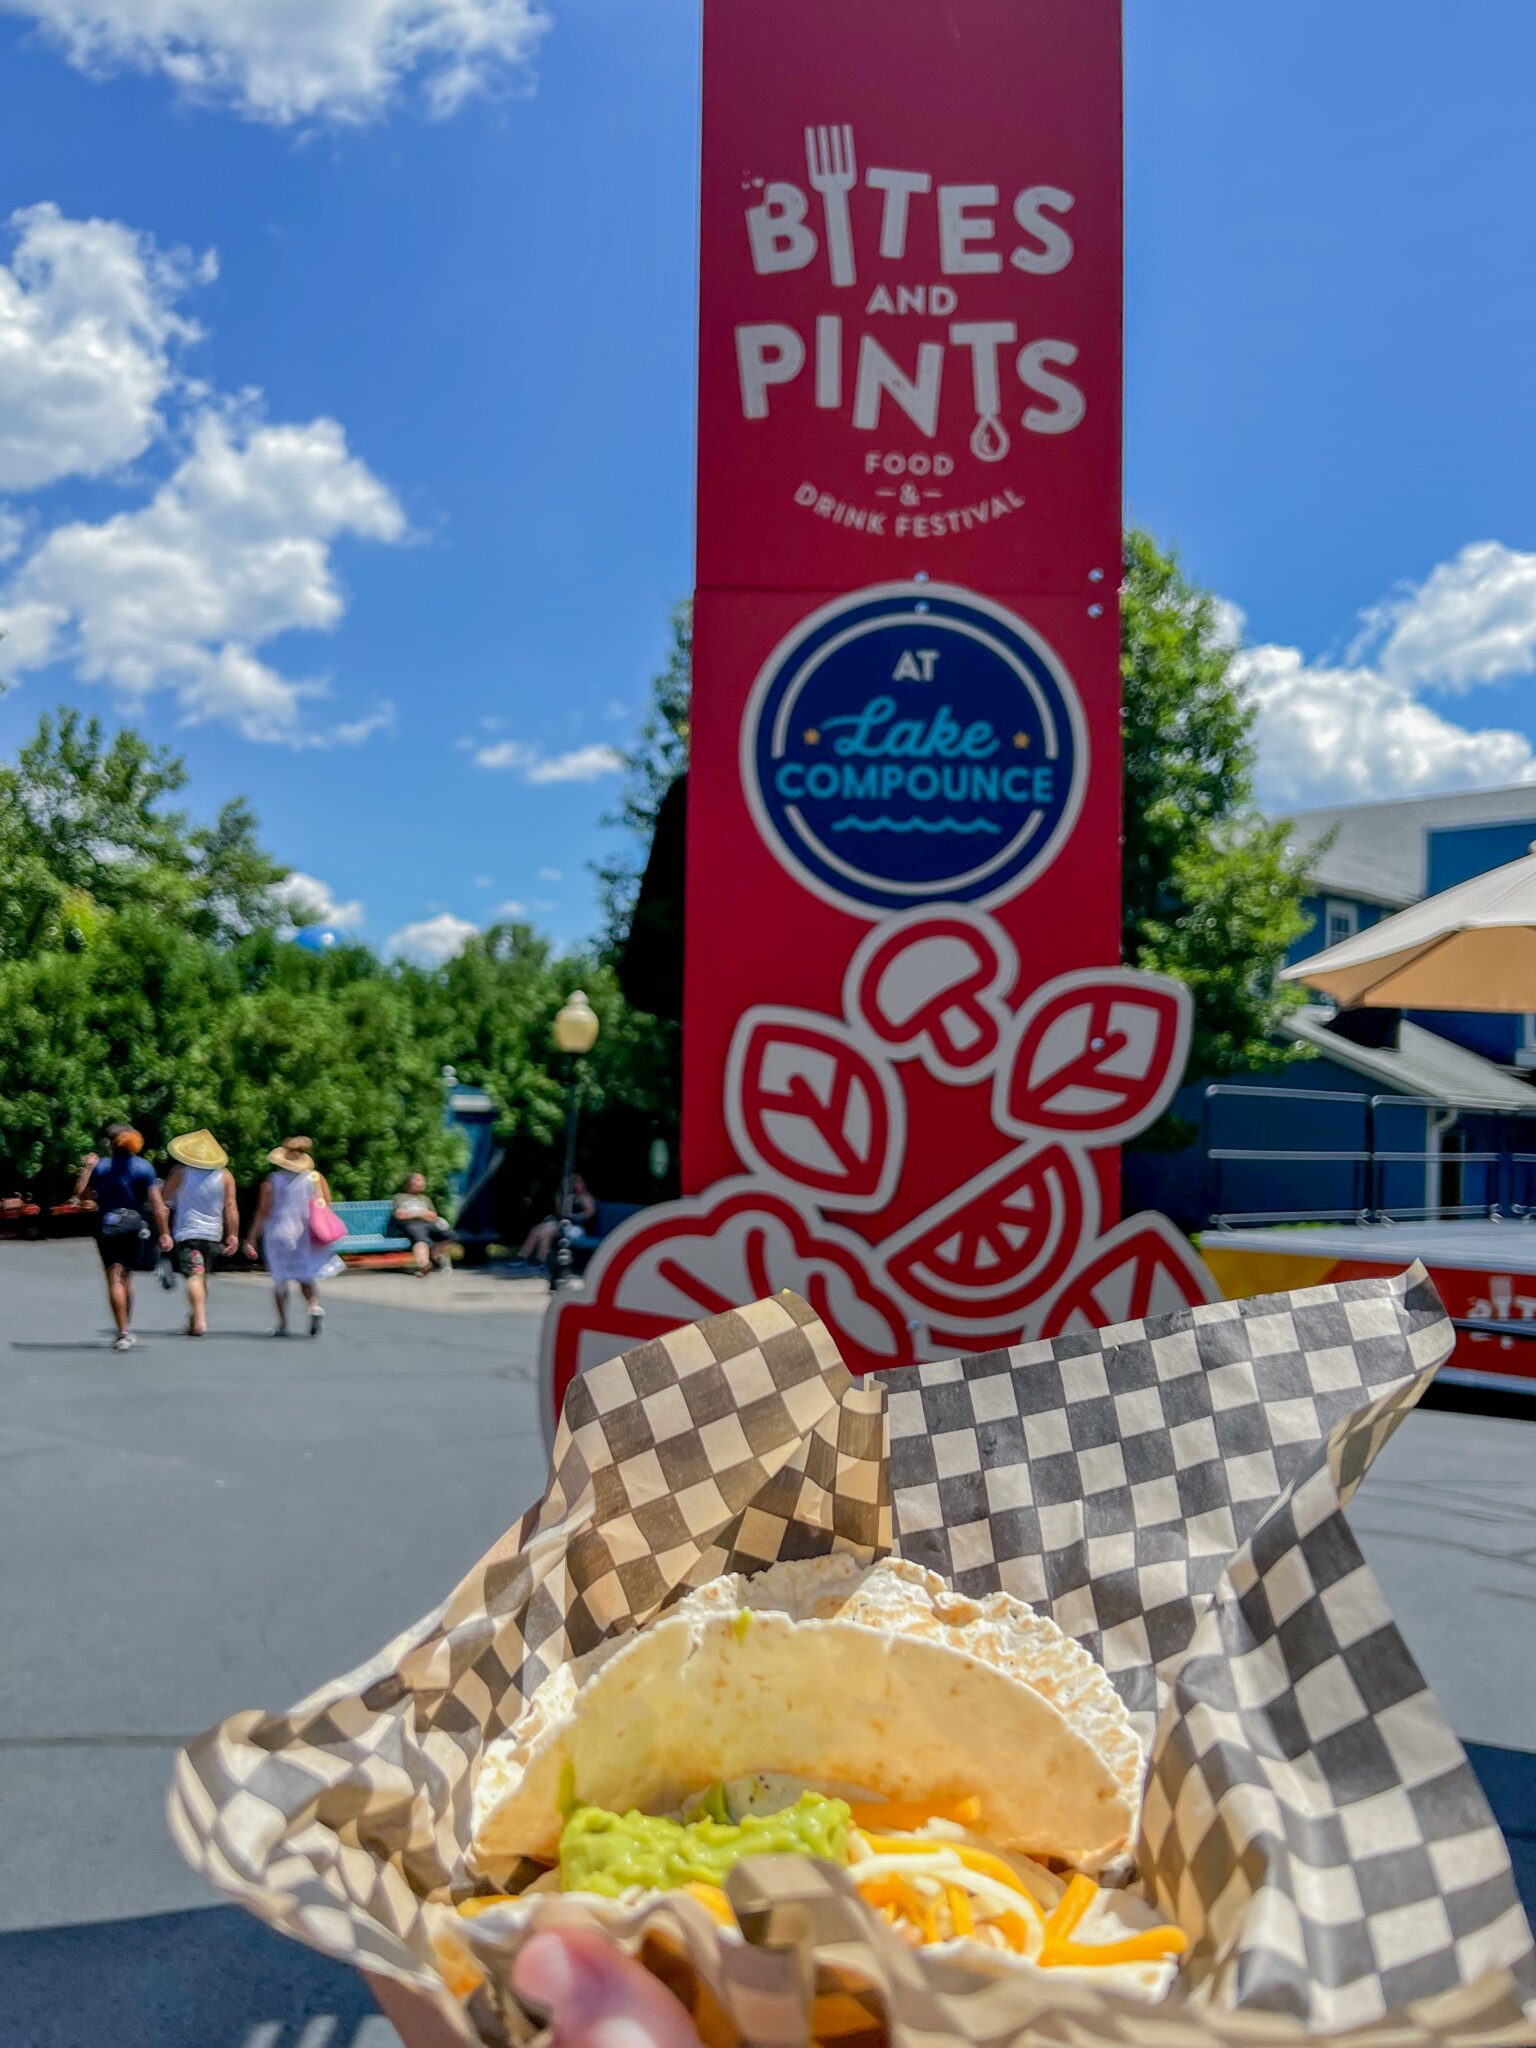 Chicken Tacos Bites and Pints